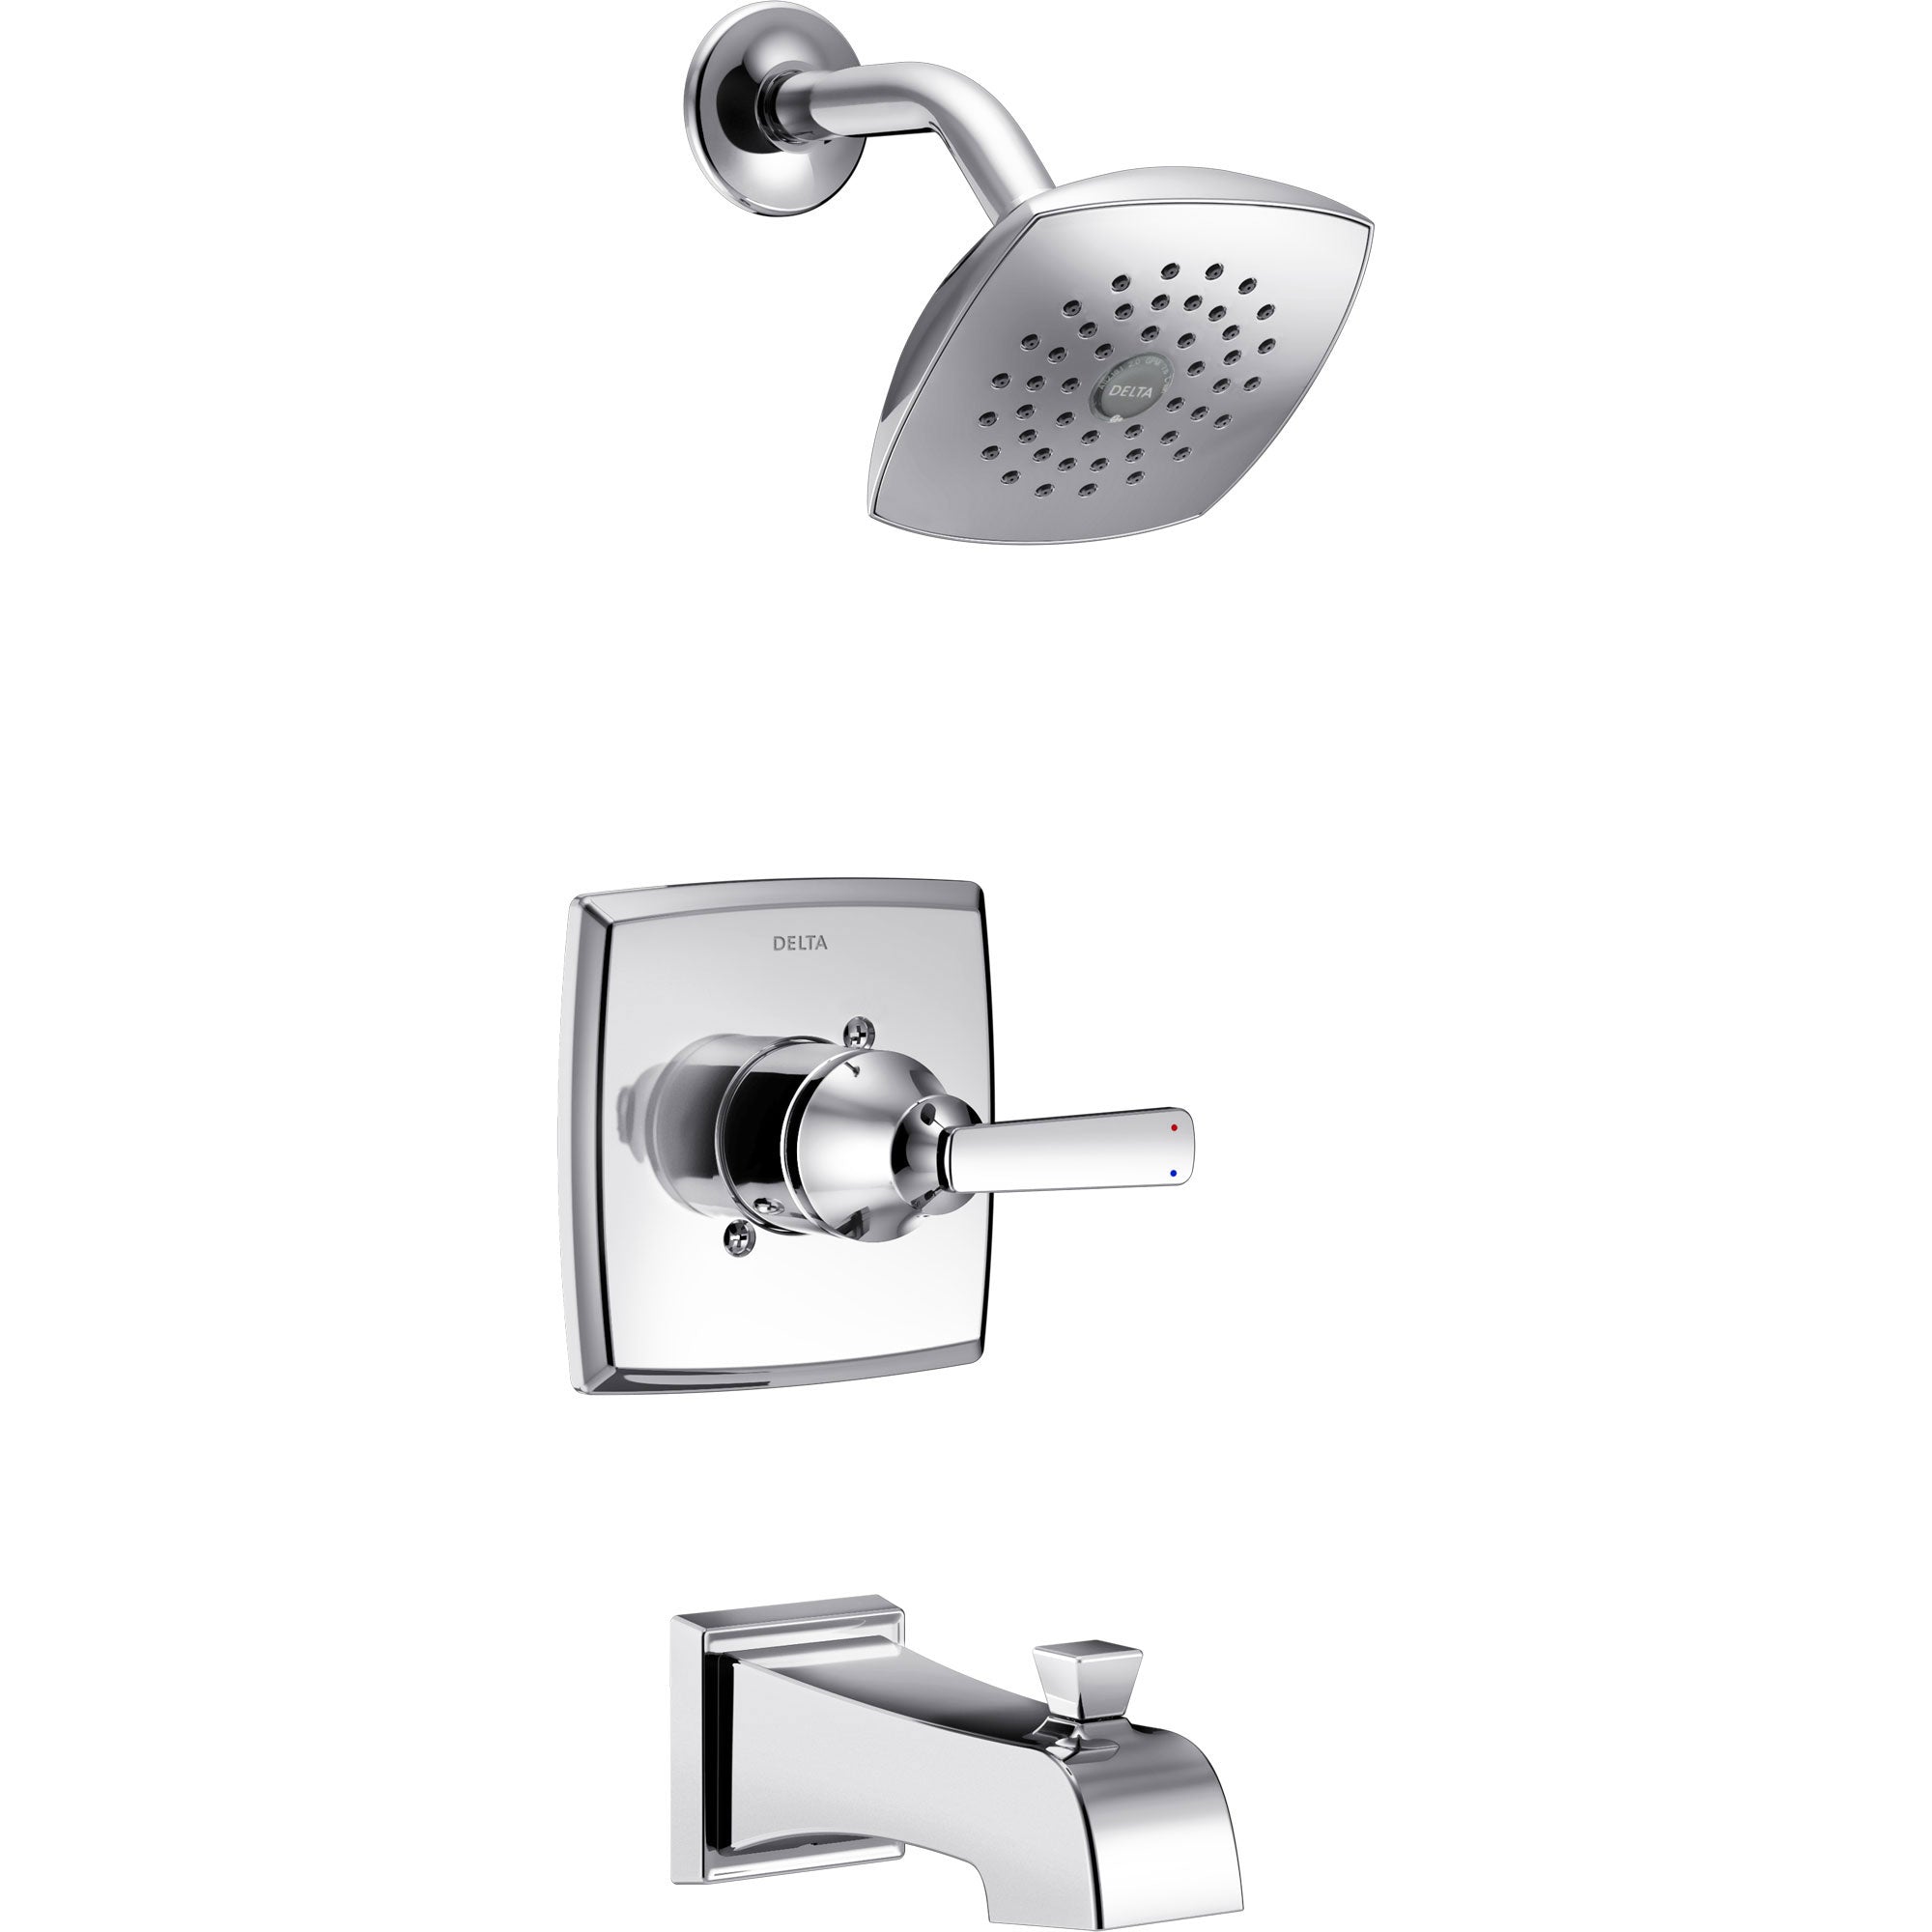 Delta Ashlyn Modern Chrome Finish 14 Series Watersense Single Handle Tub and Shower Combination Faucet INCLUDES Rough-in Valve D1174V